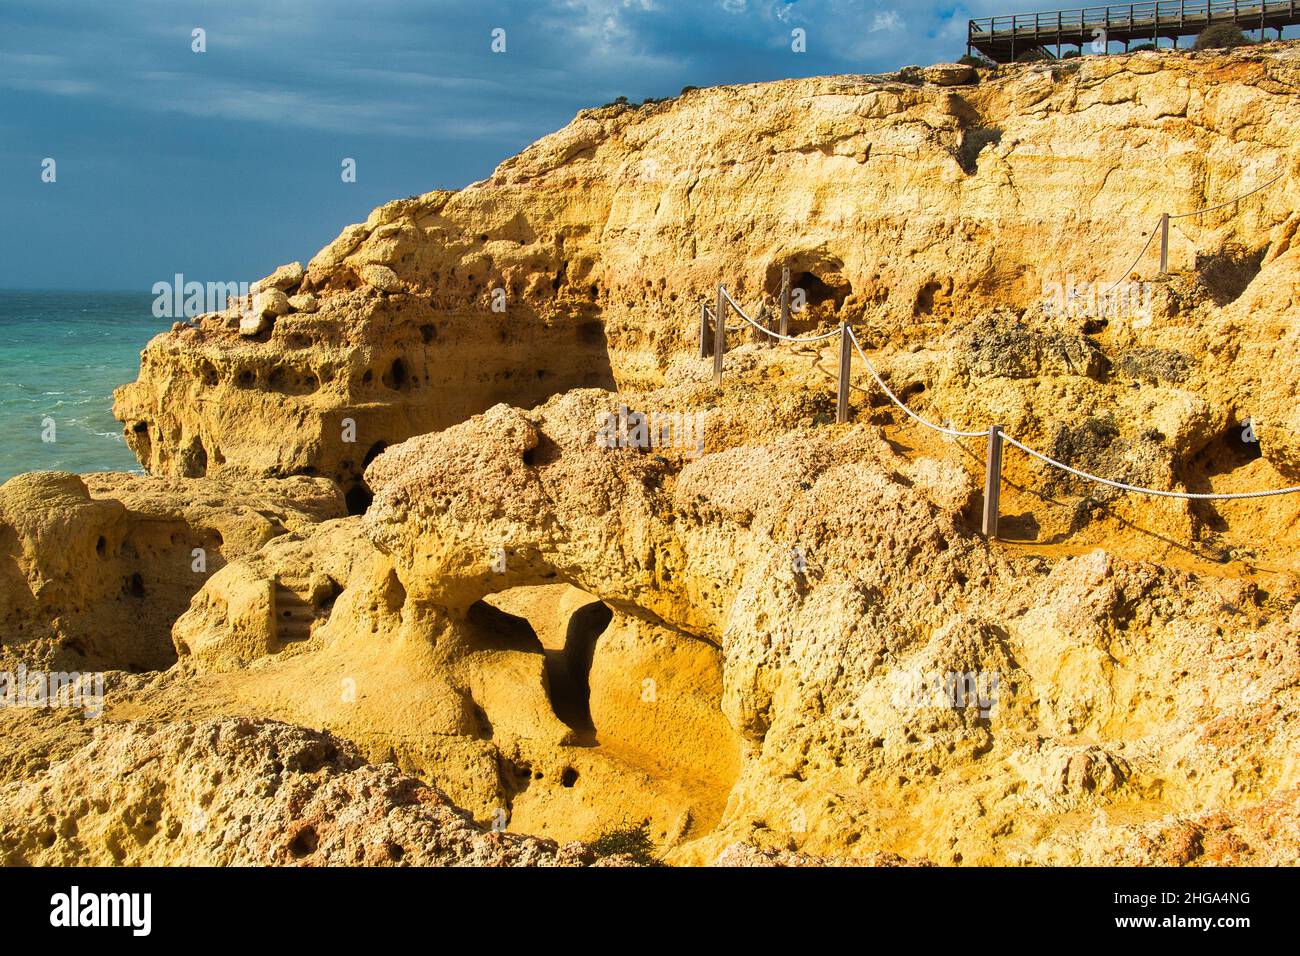 Part of the Algar Seco Cliff Walk, over the eroded limestone cliffs close to Carvoeiro, Algarve, Portugal Stock Photo